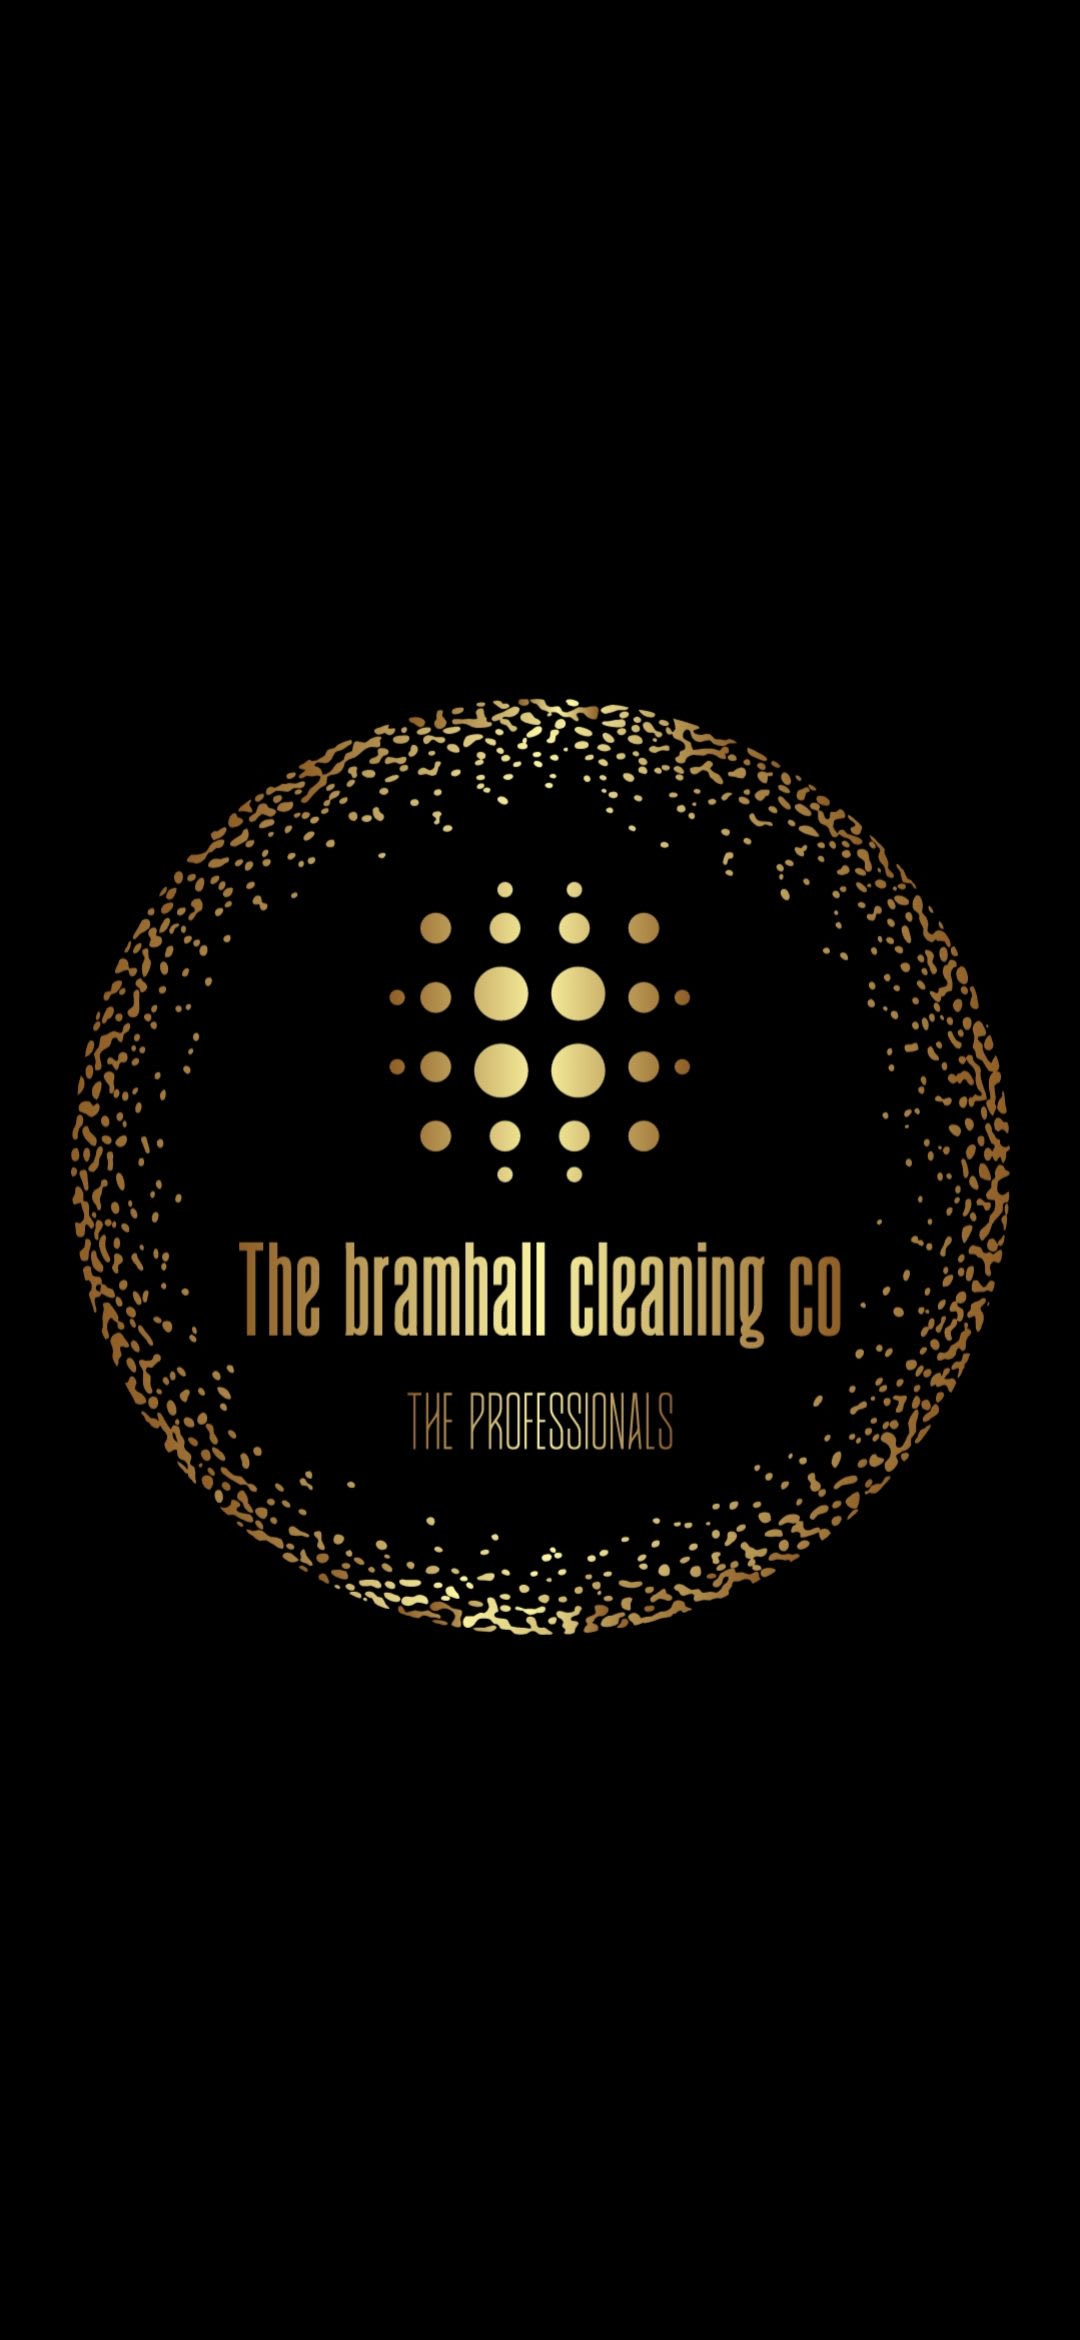 The Bramhall Cleaning Co